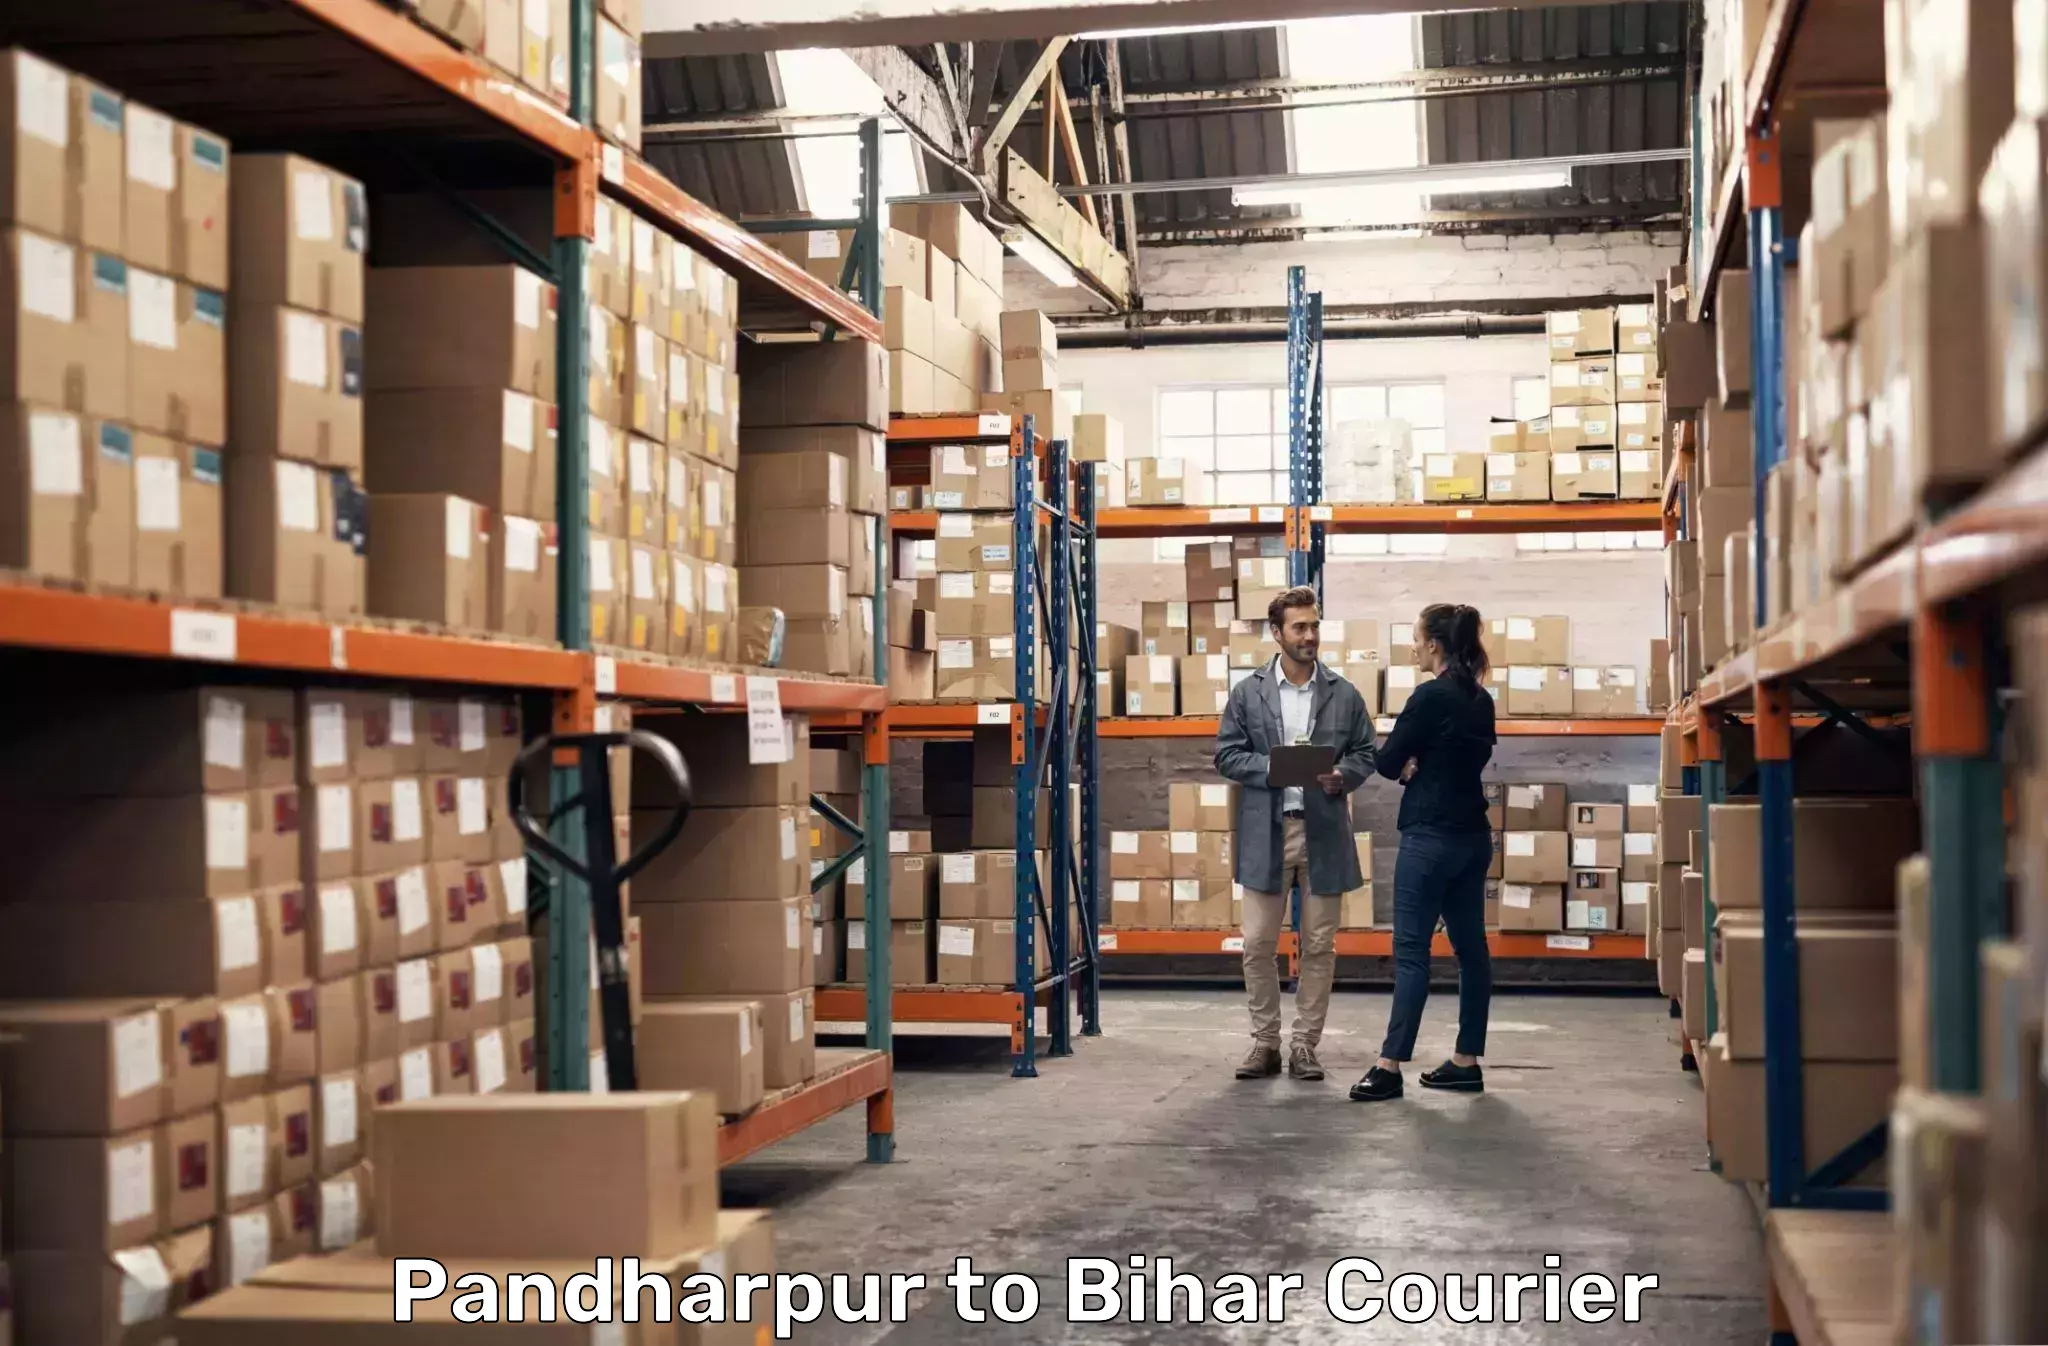 Budget-friendly shipping Pandharpur to Chainpur